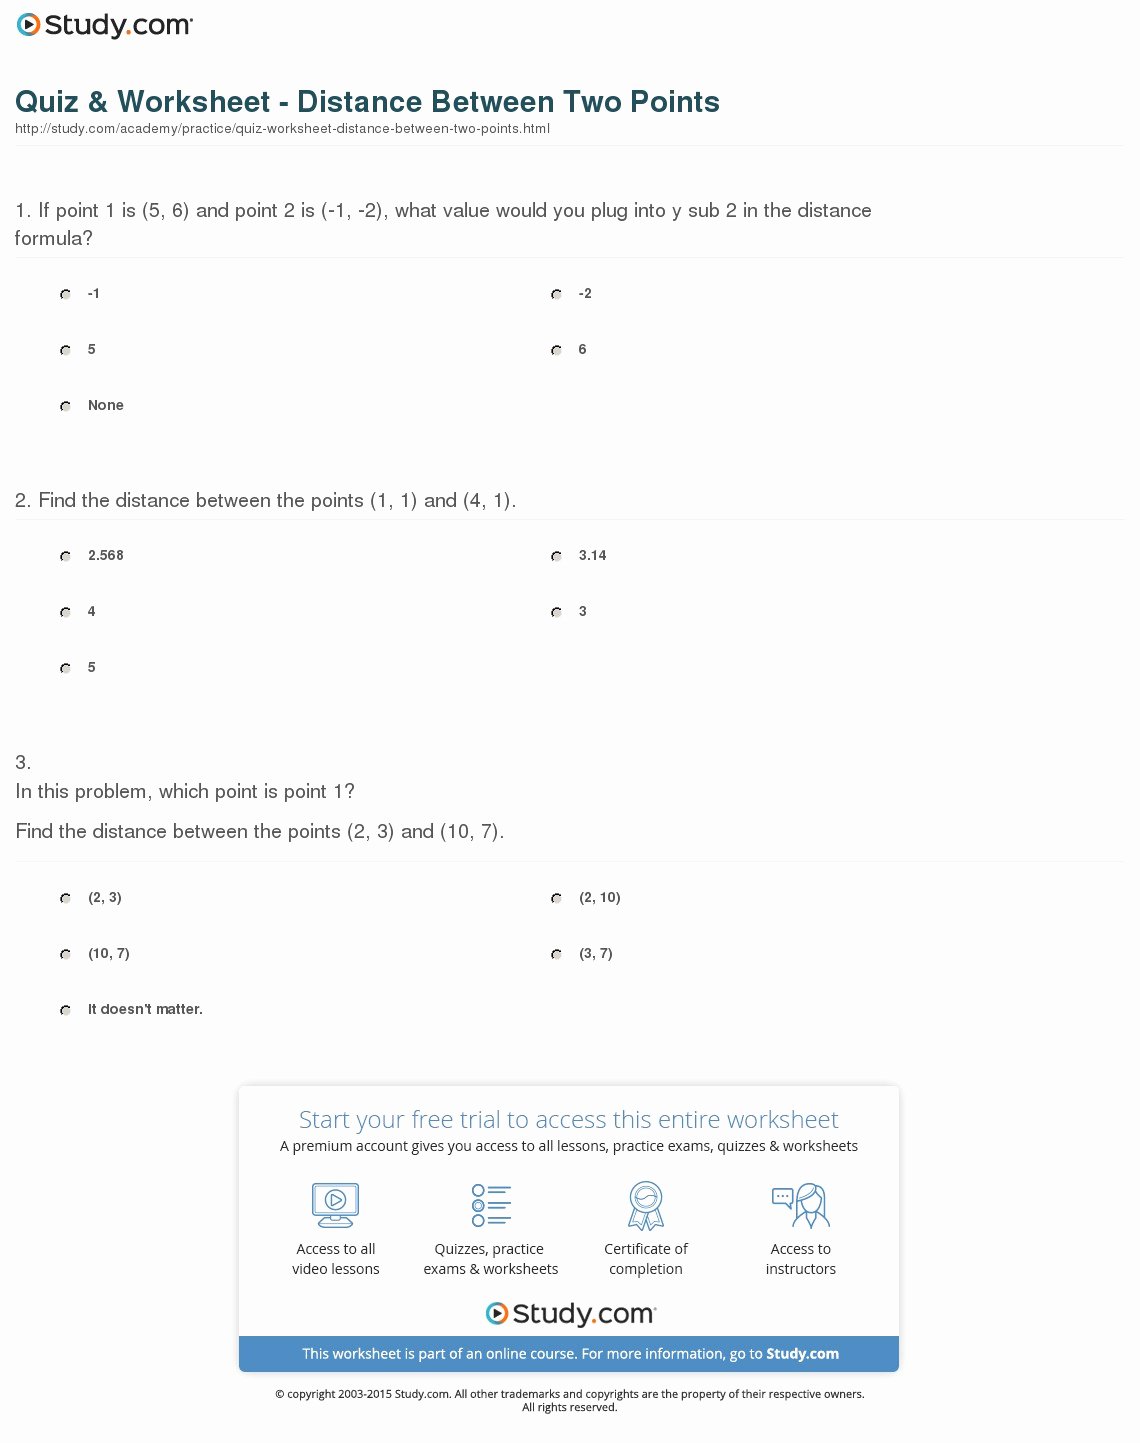 Distance formula Worksheet with Answers Elegant Quiz &amp; Worksheet Distance Between Two Points